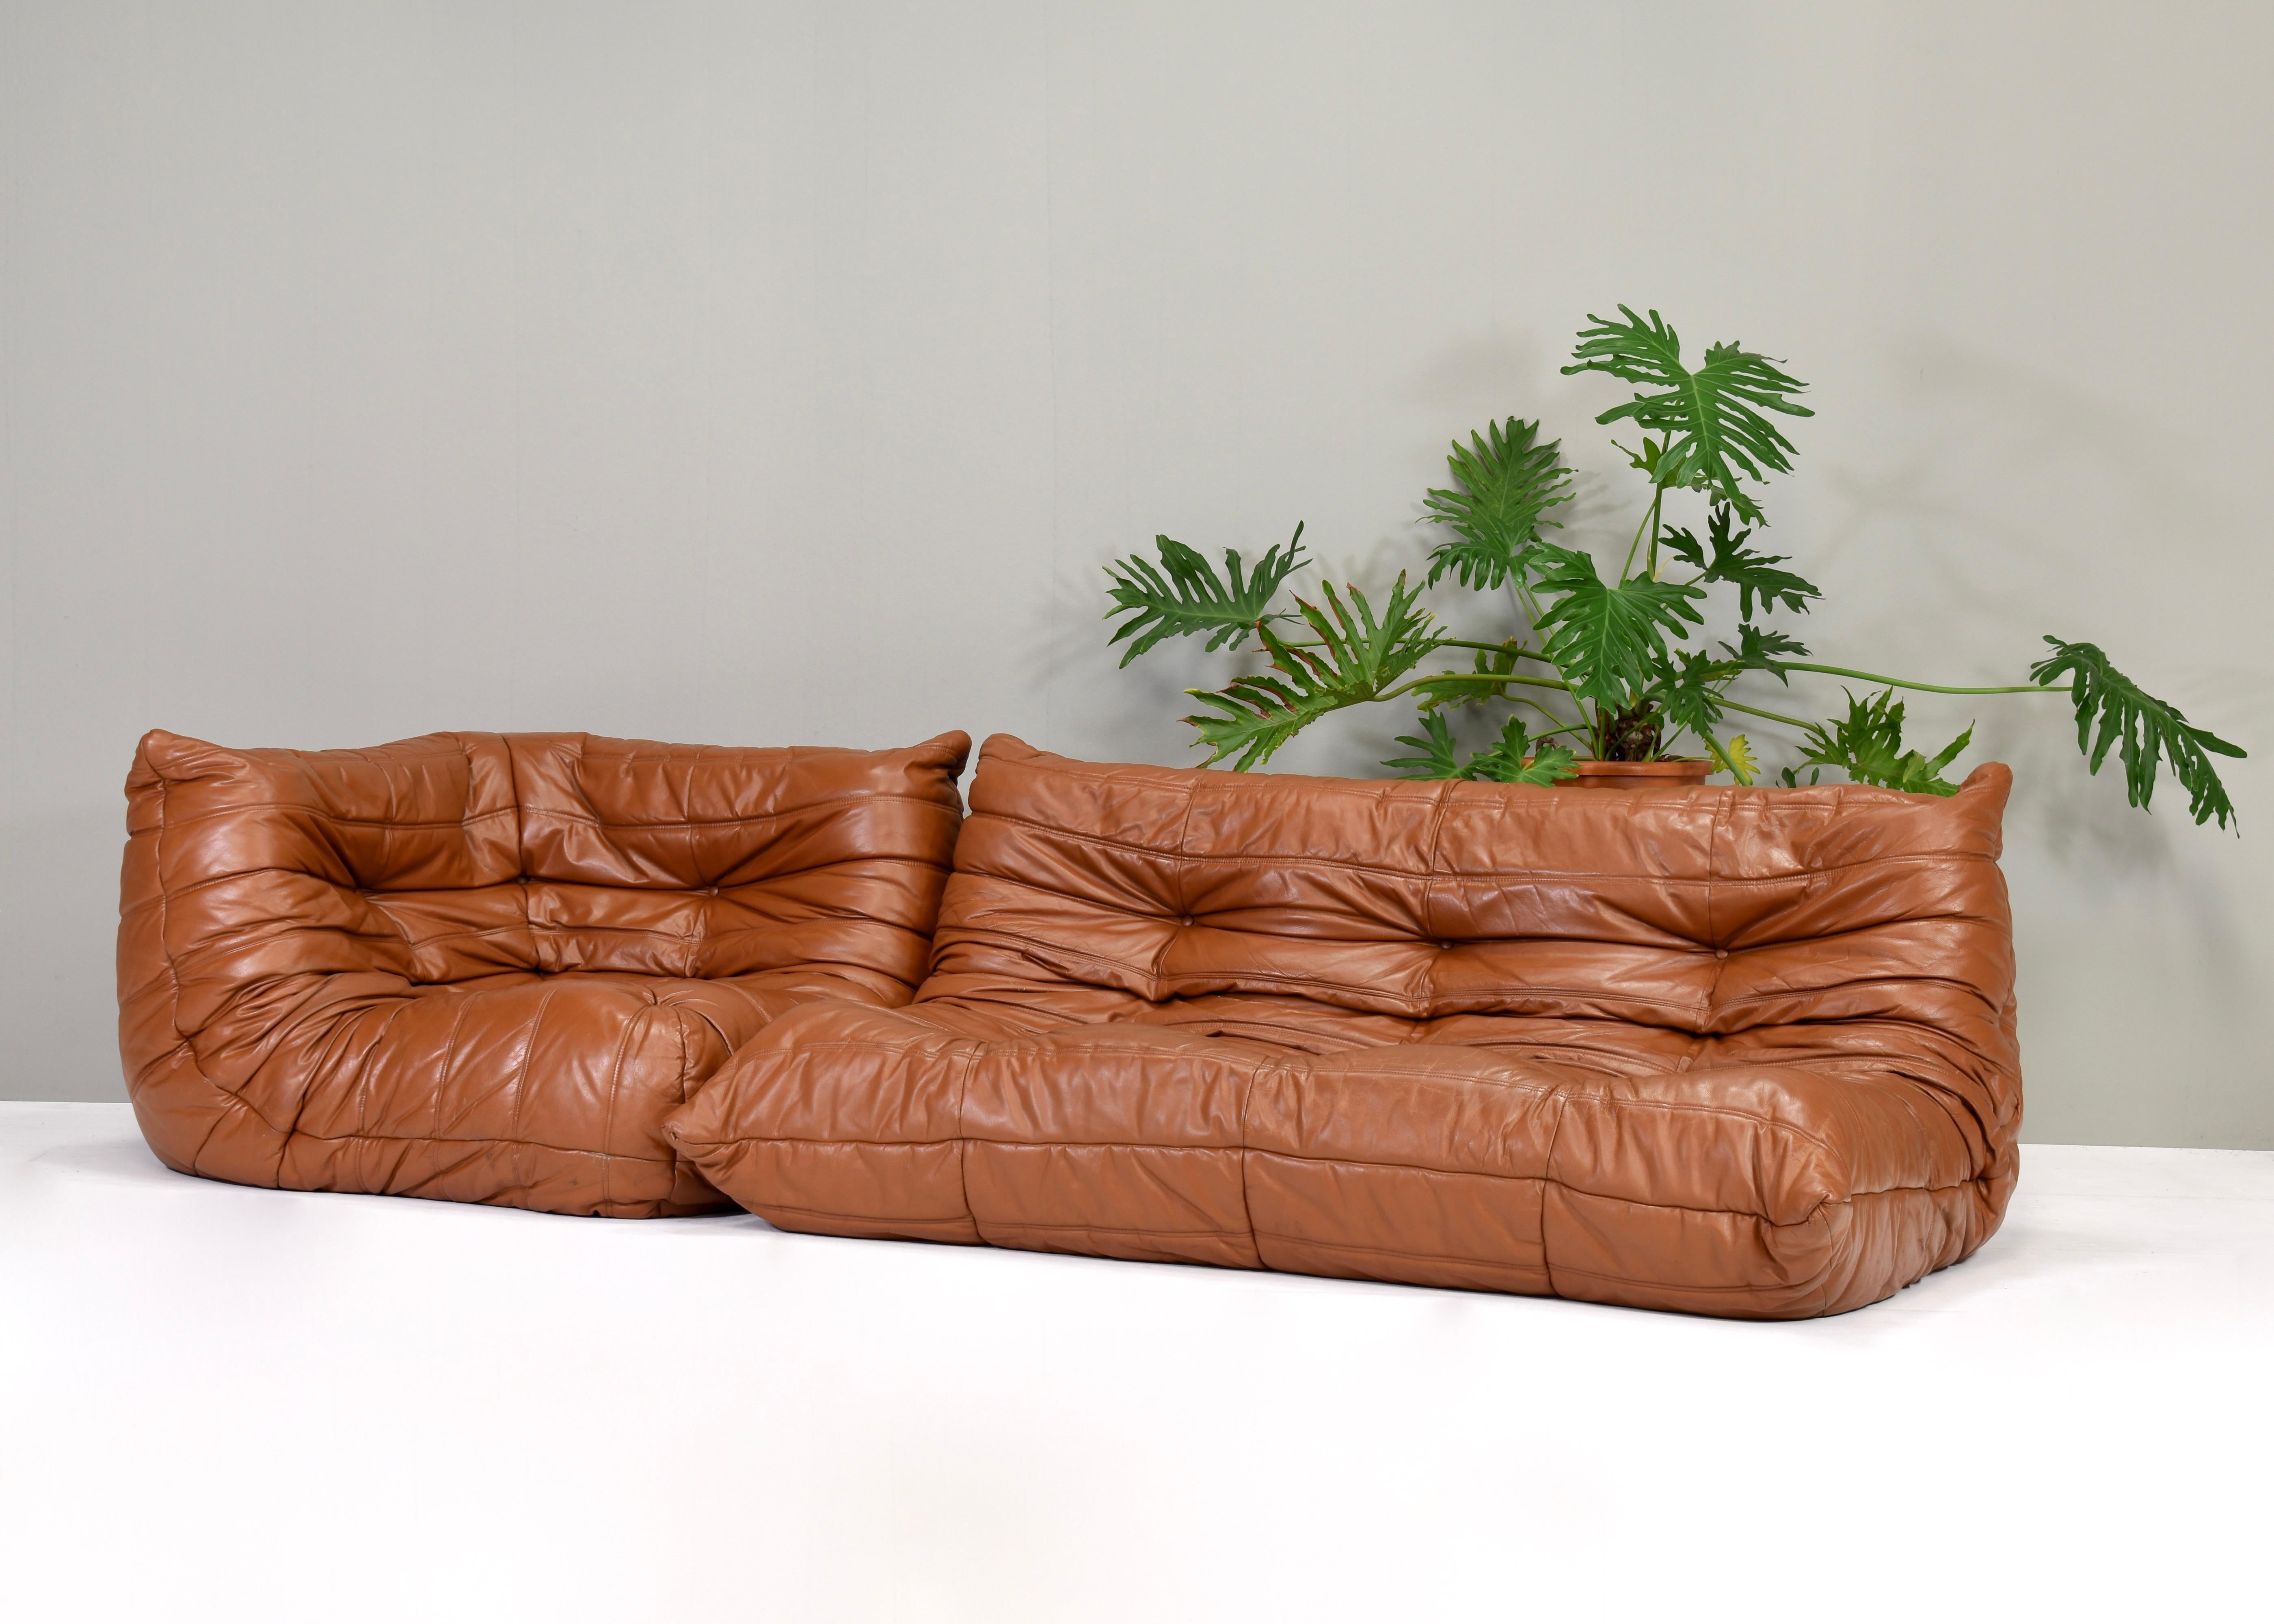 1970's period original Togo sofa and corner seat in tan / cognac leather by Michel Ducaroy for Ligne Roset, France – circa 1970. This set is period original and still remains in good condition. It has some age and use related wear to the leather.